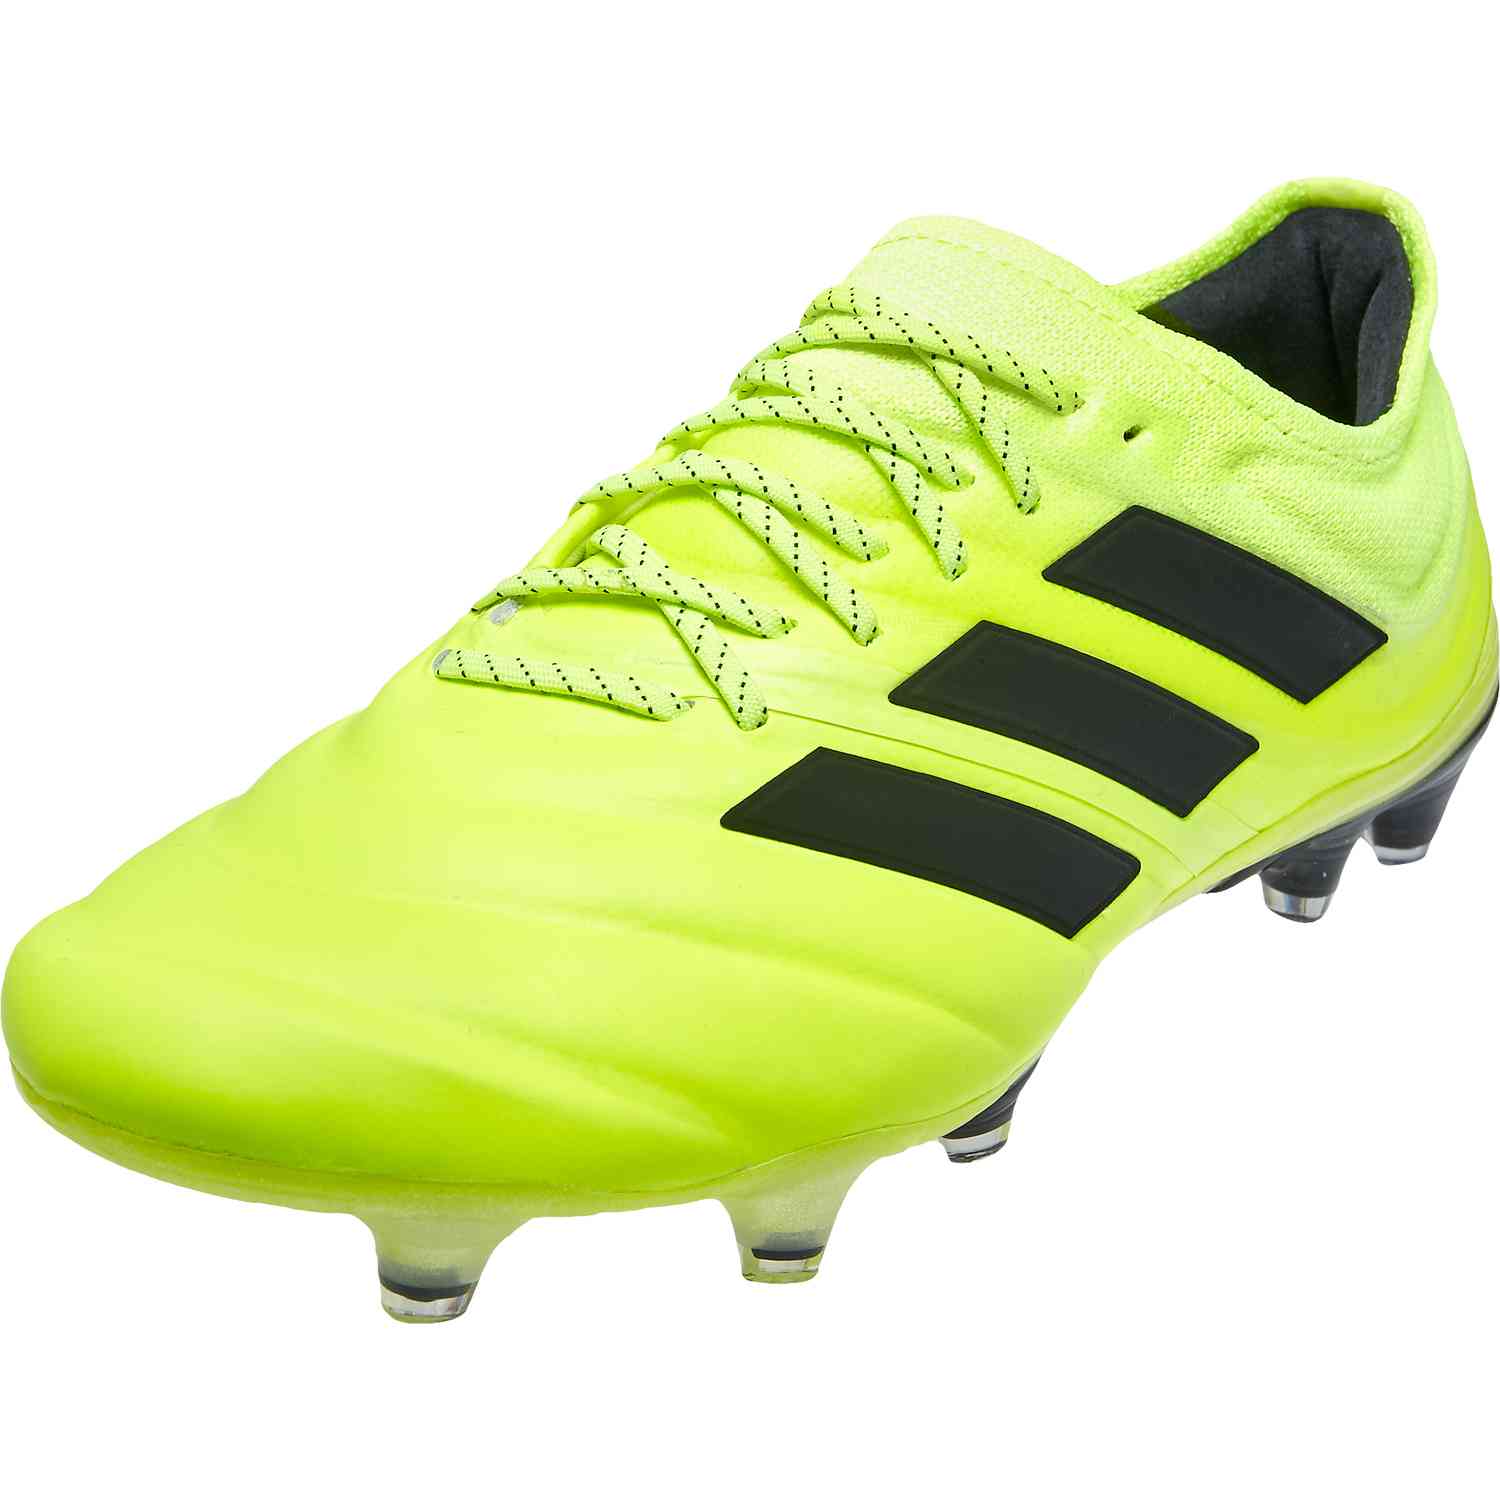 Squire Upset Drive out adidas Copa 19.1 FG - Hard Wired - SoccerPro